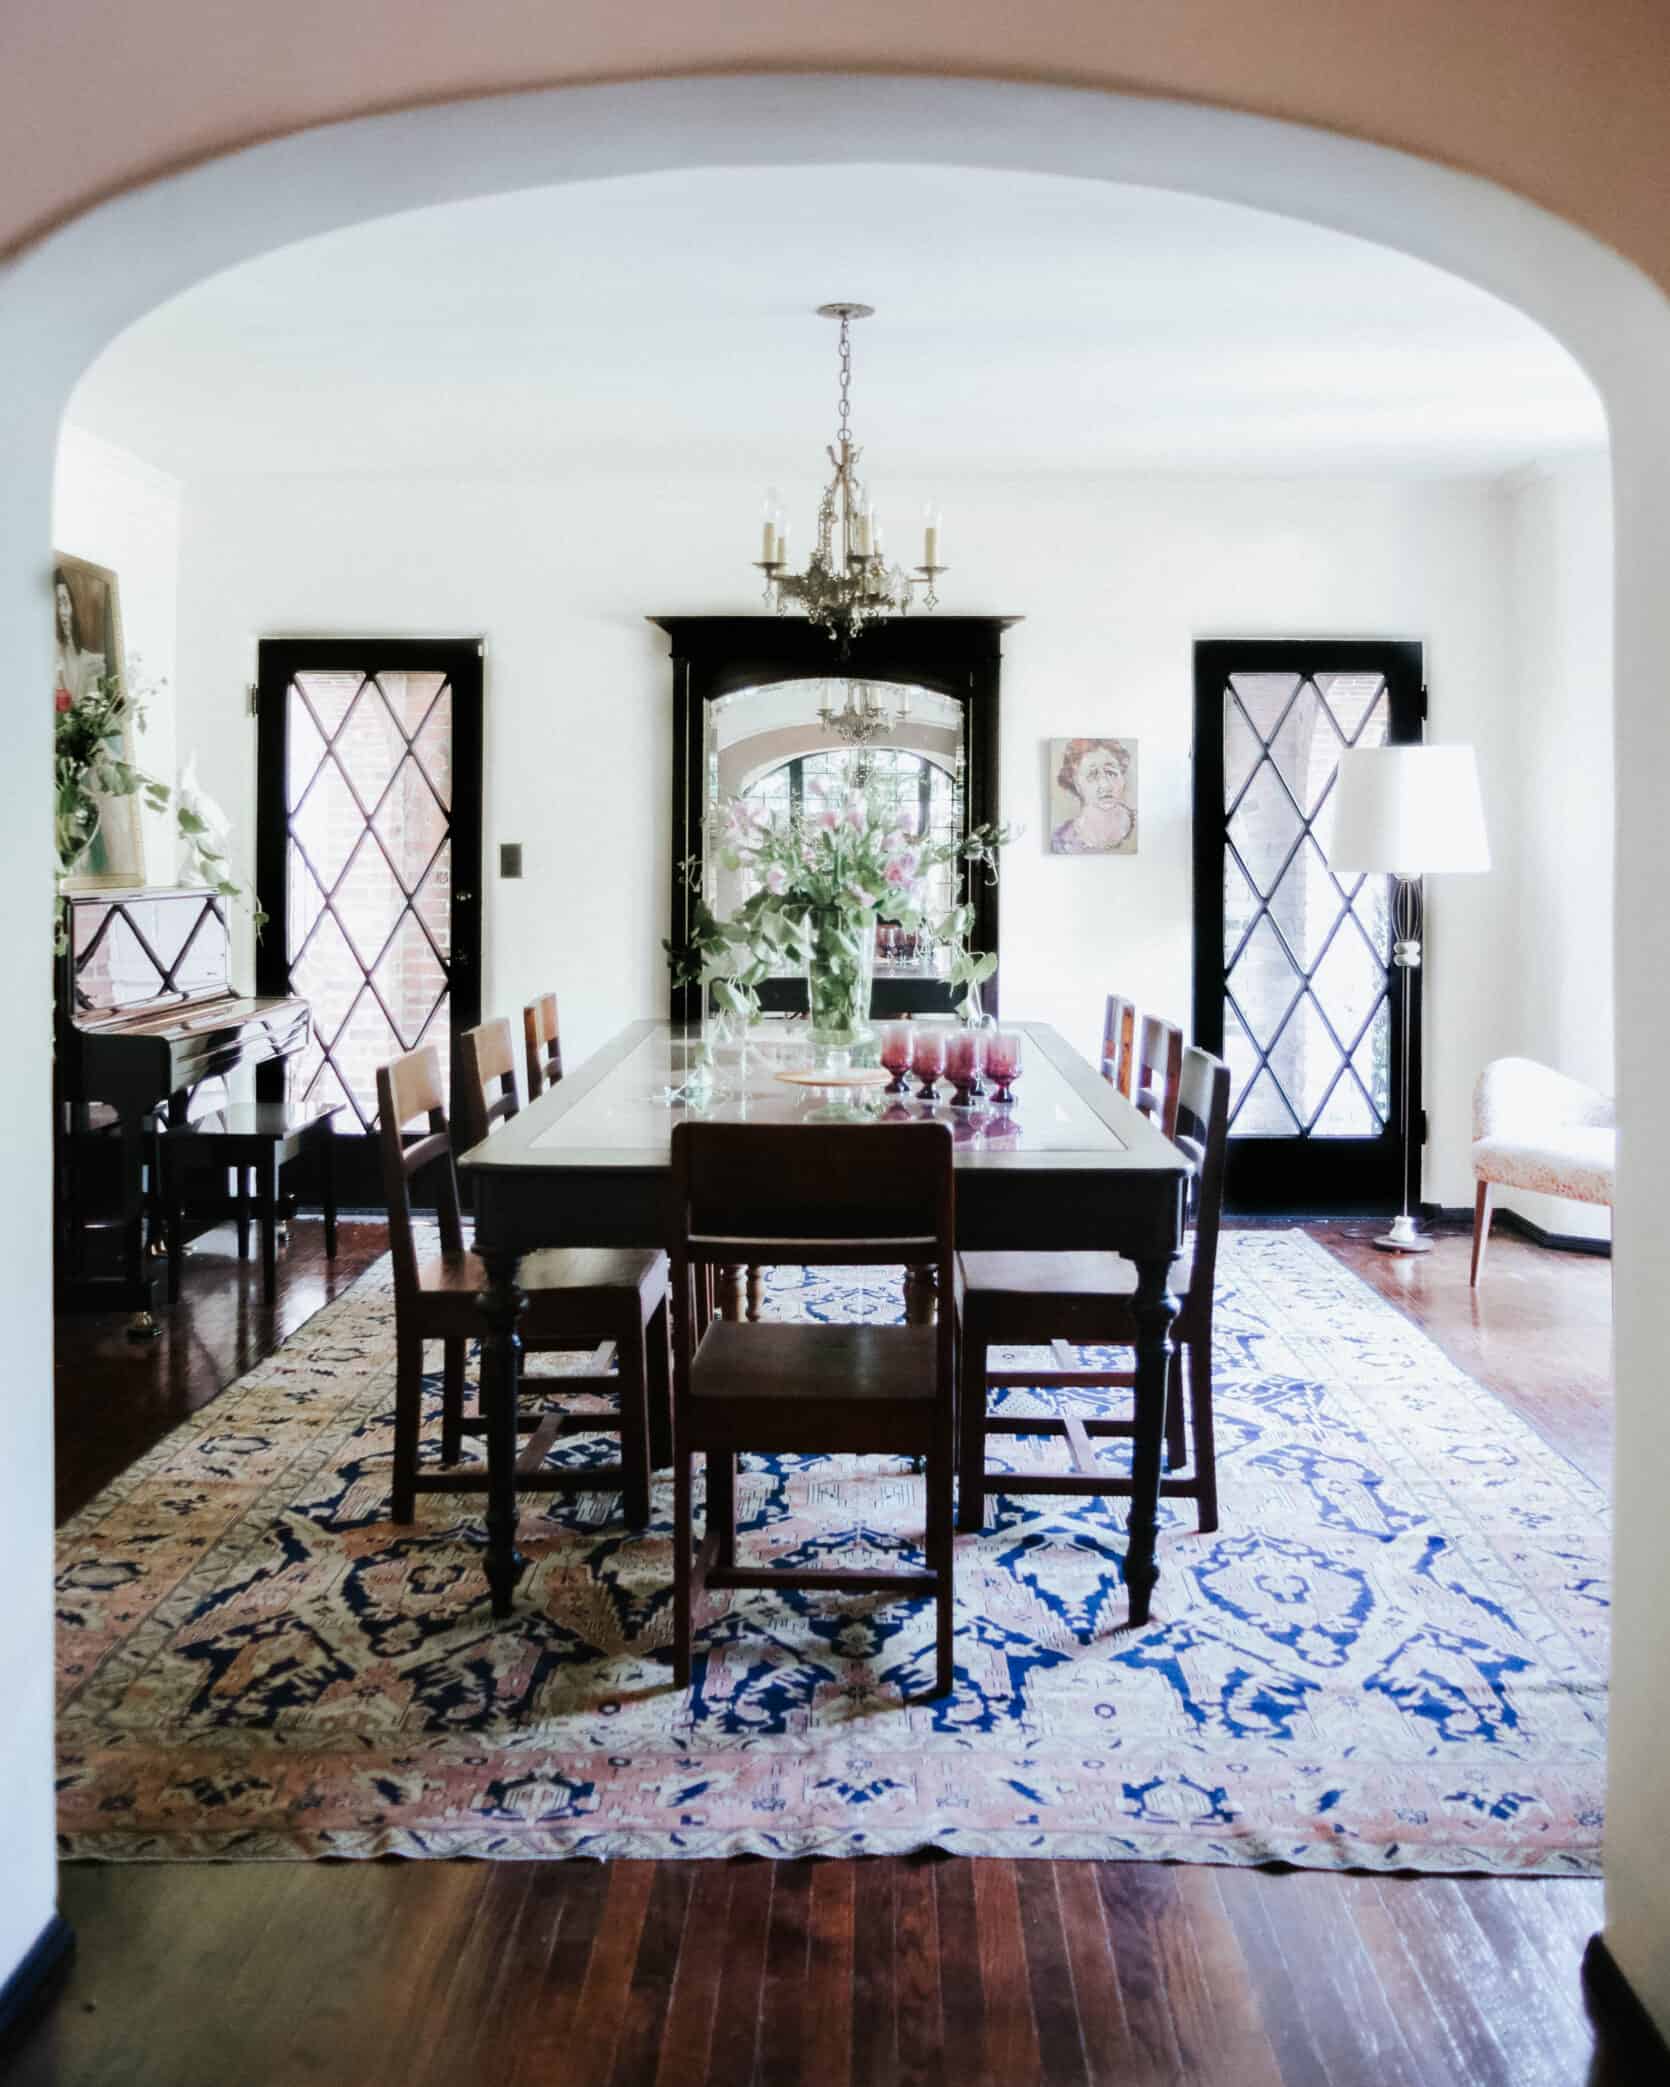 How To Lean Into Eclectic Granny The Minimalist Way (Via A Vintage Lover'S Dream Home Tour)